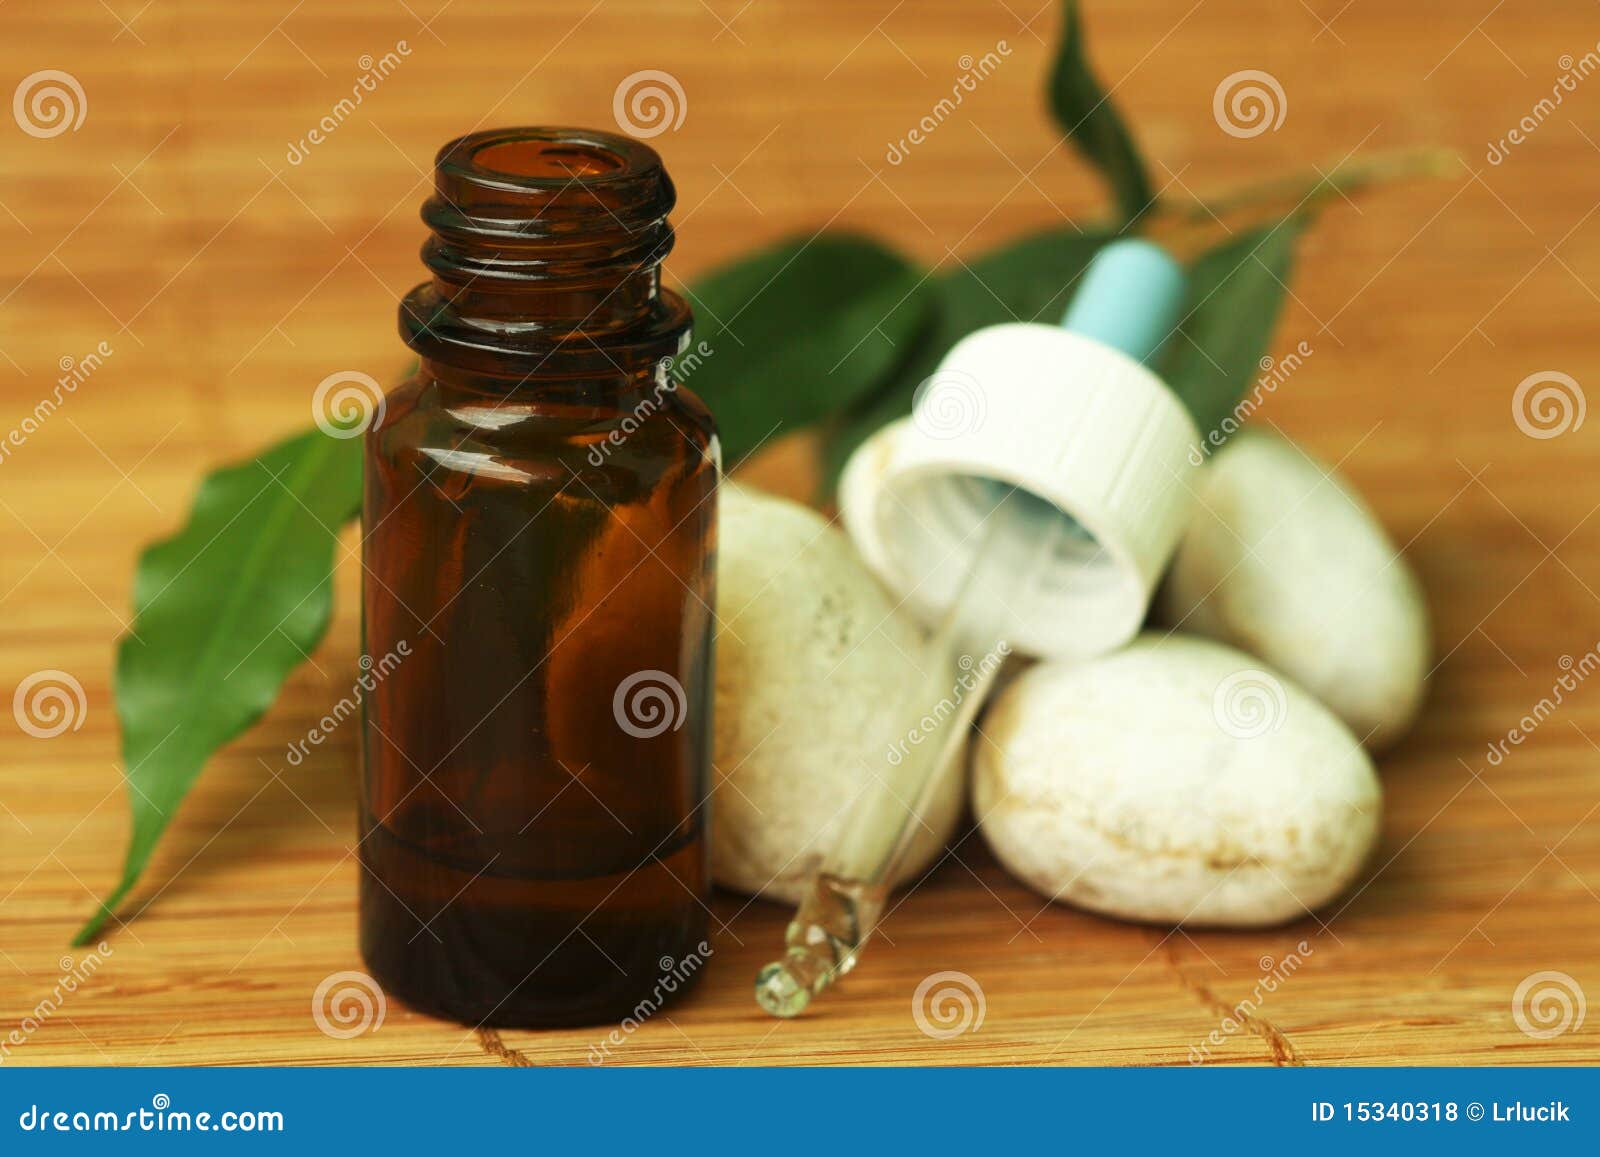 Aromatherapy oil stock photo. Image of lotion, herbal - 15340318